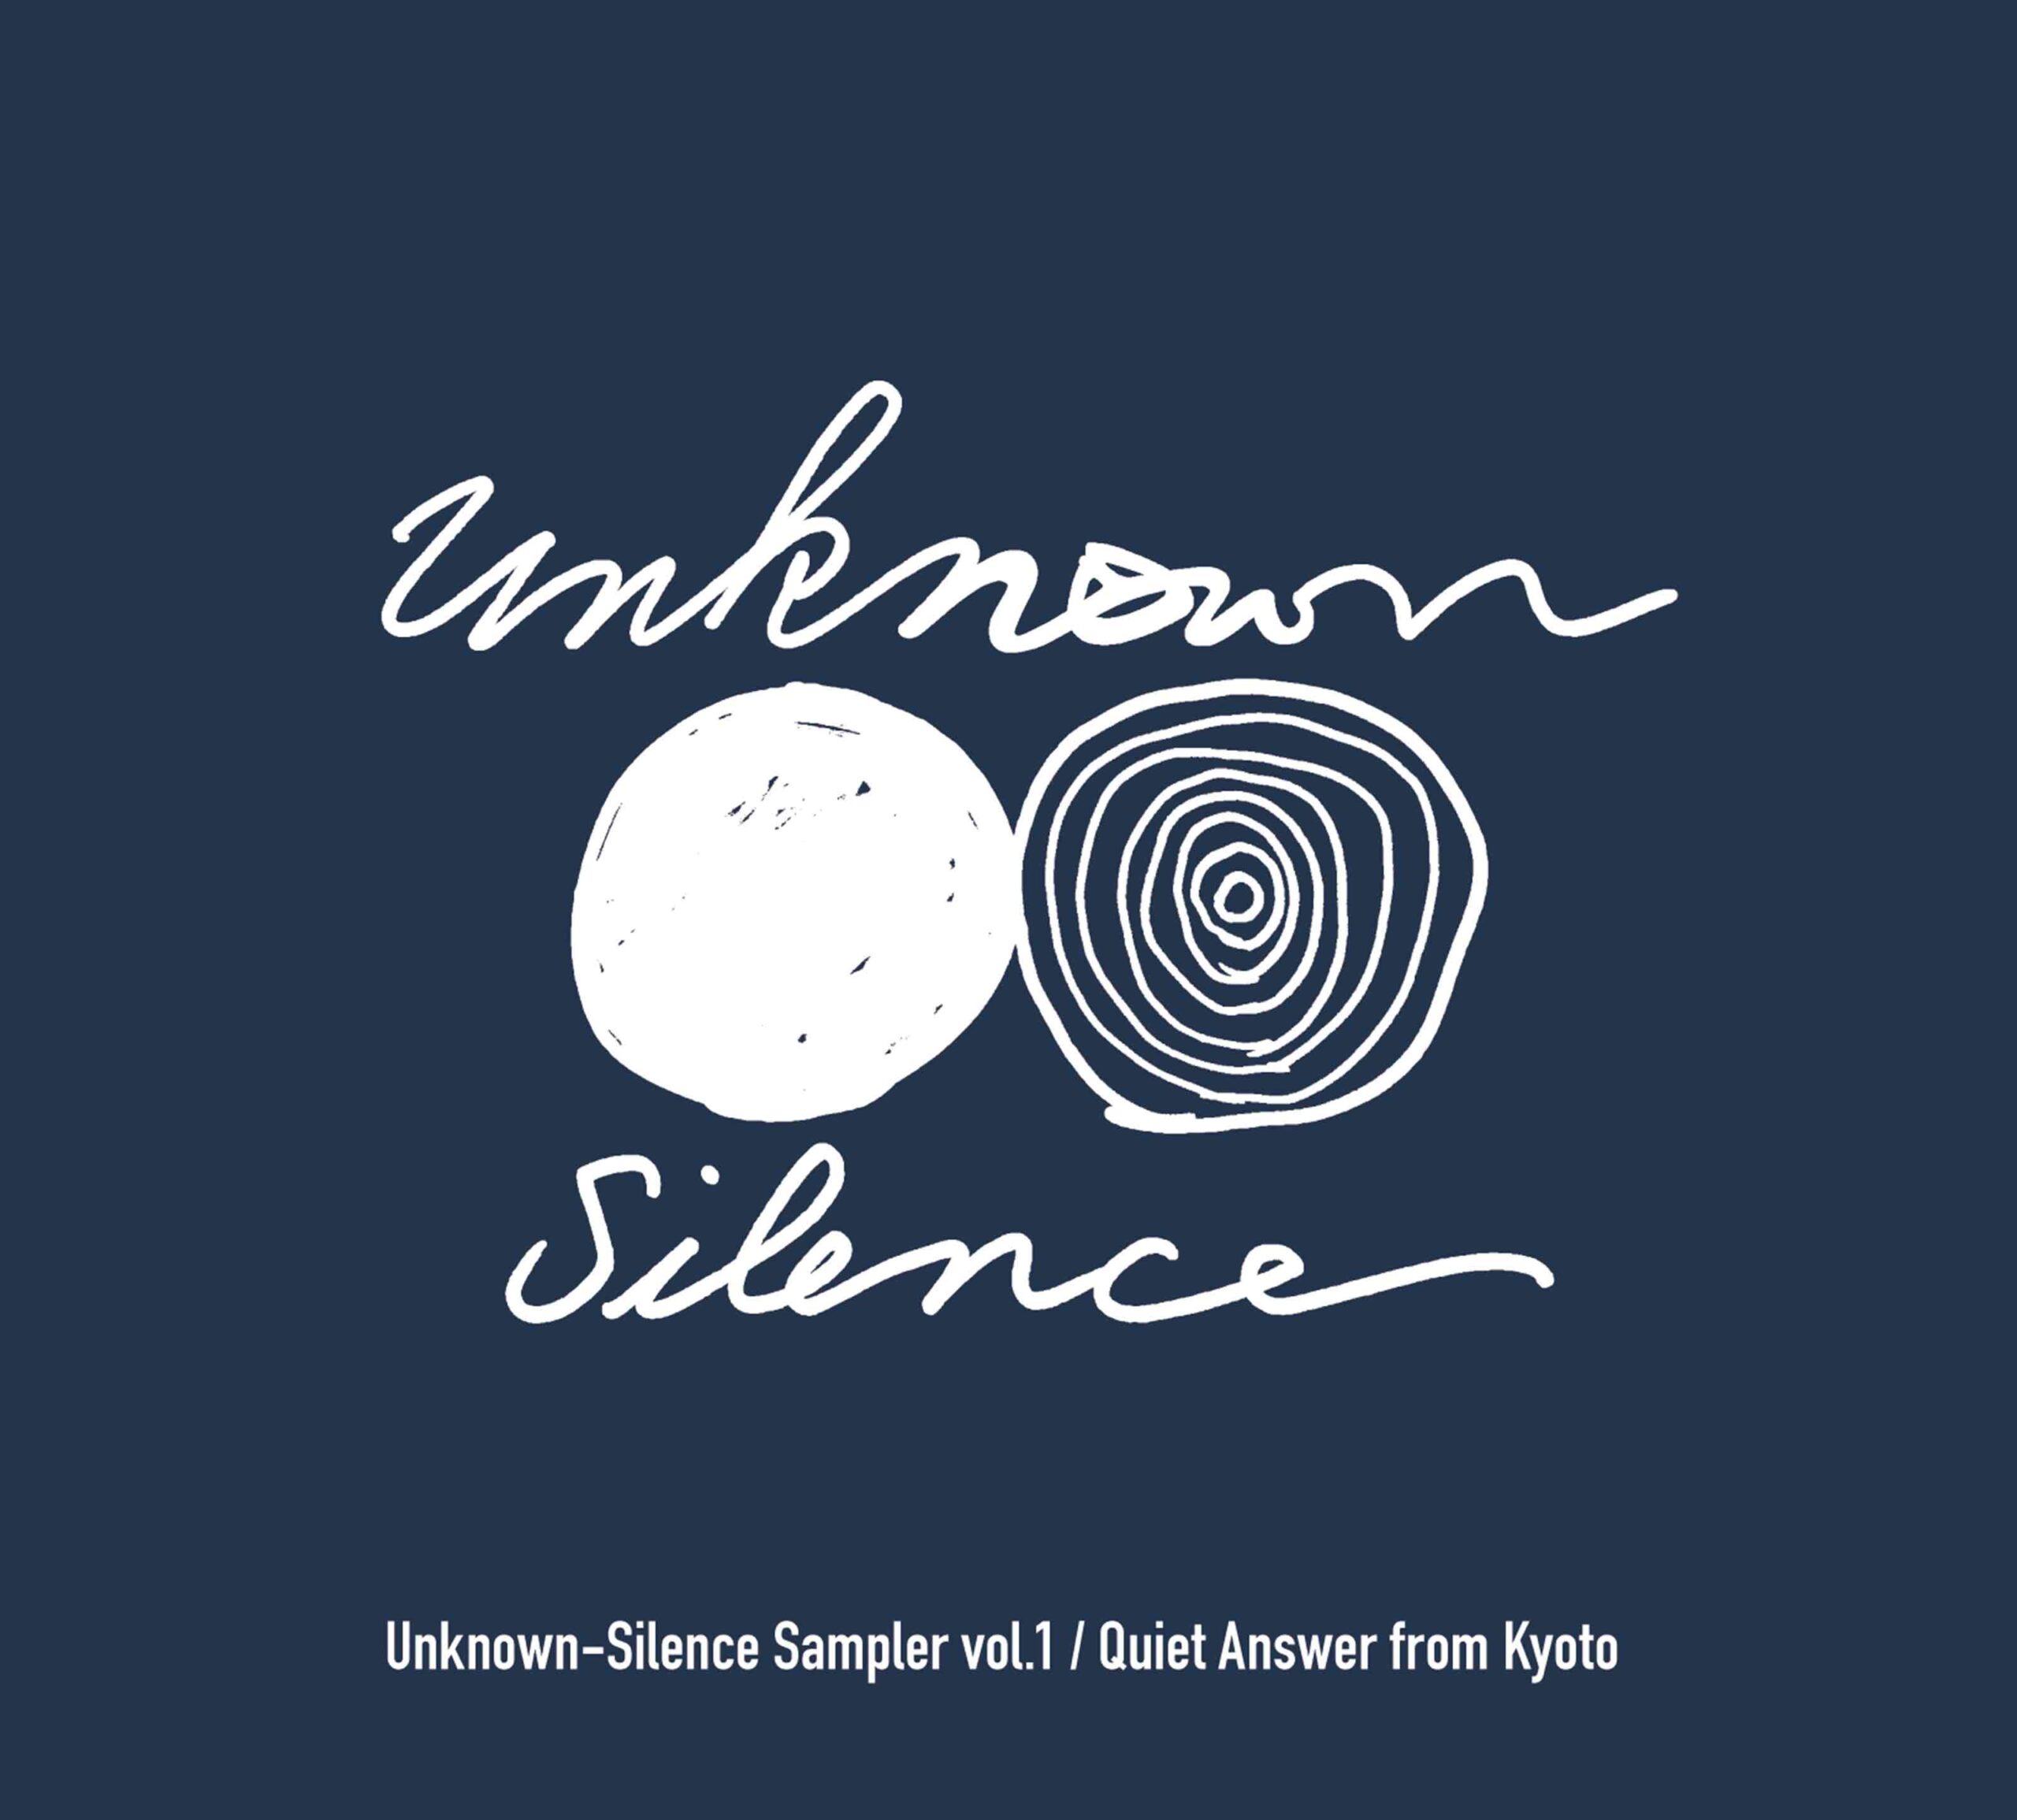 Quiet answer from Kyoto Unknown-Silence Sampler vol.1